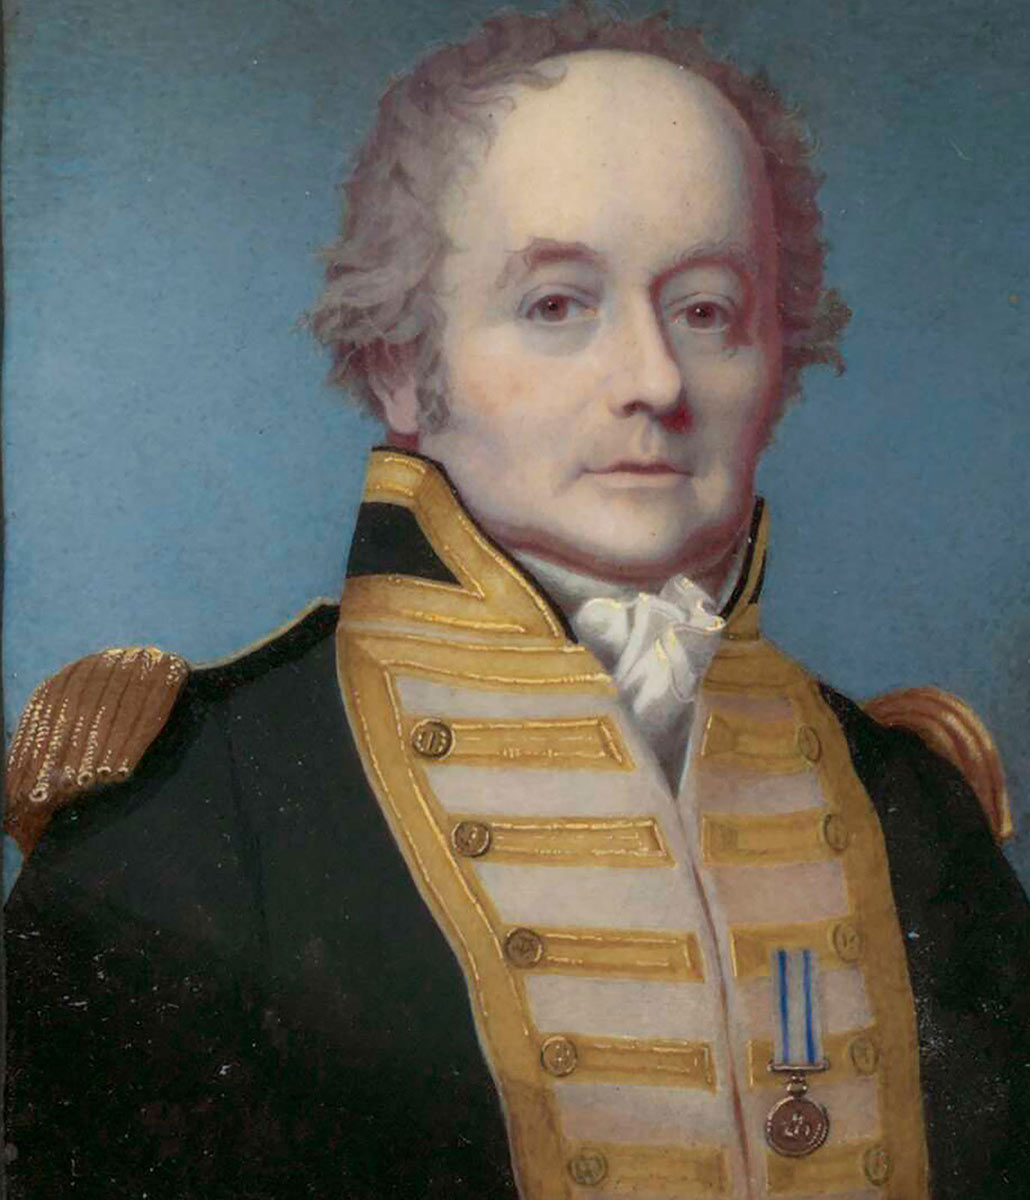 Colour portrait of late middle-aged man wearing a gold-brocaded uniform with epaulettes and a medal. - click to view larger image